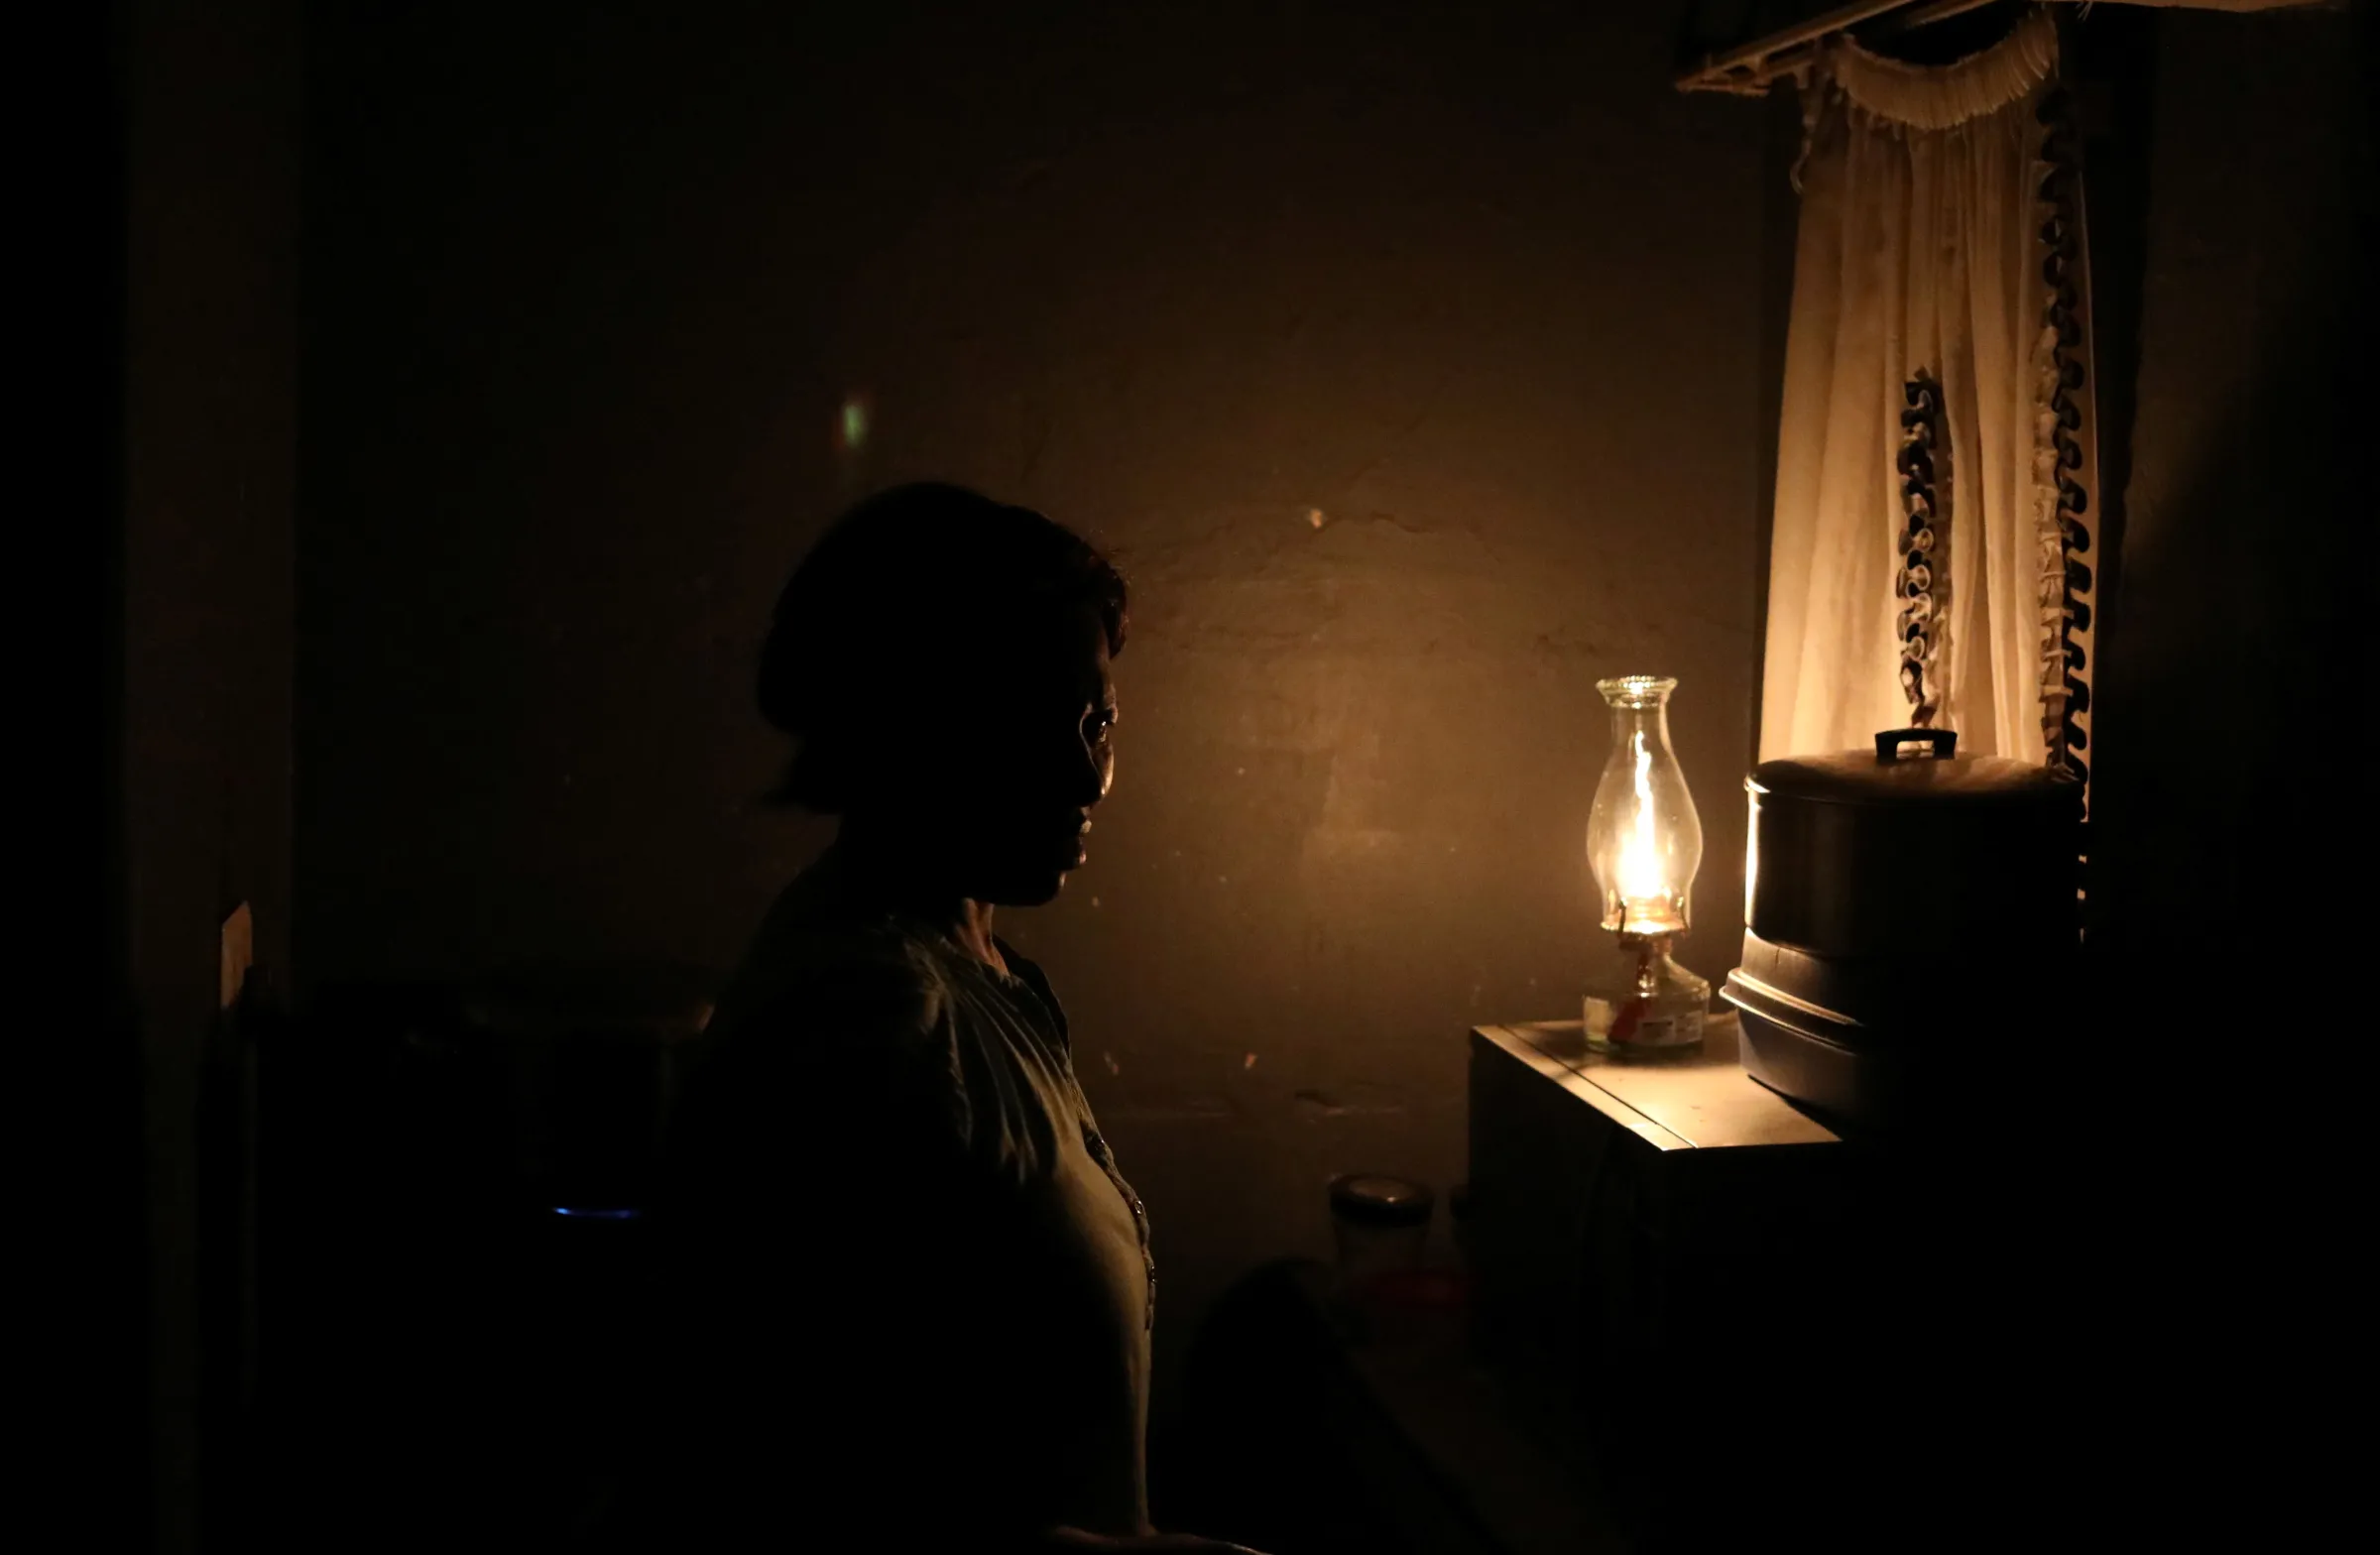 Power blackout survival tips from around the world